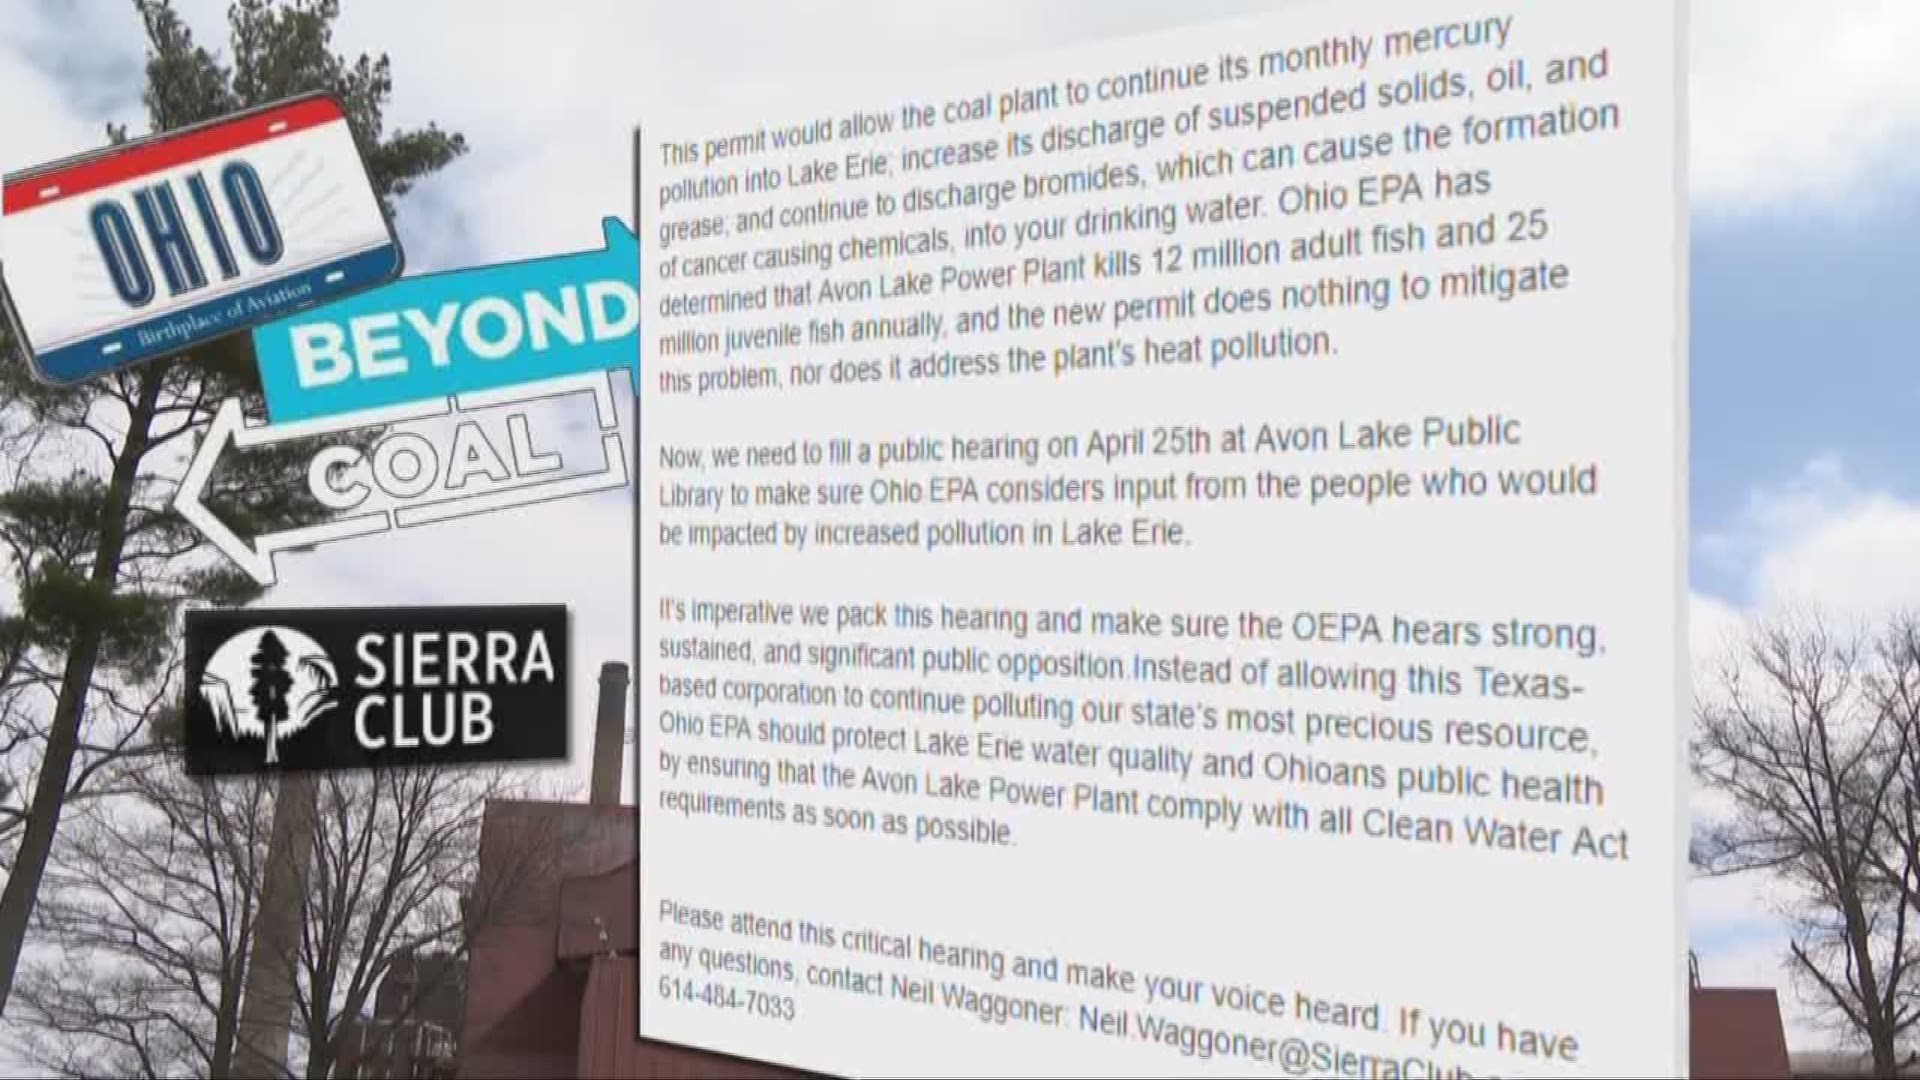 Facebook post stirs up new fears about Coal burning plant in Avon Lake